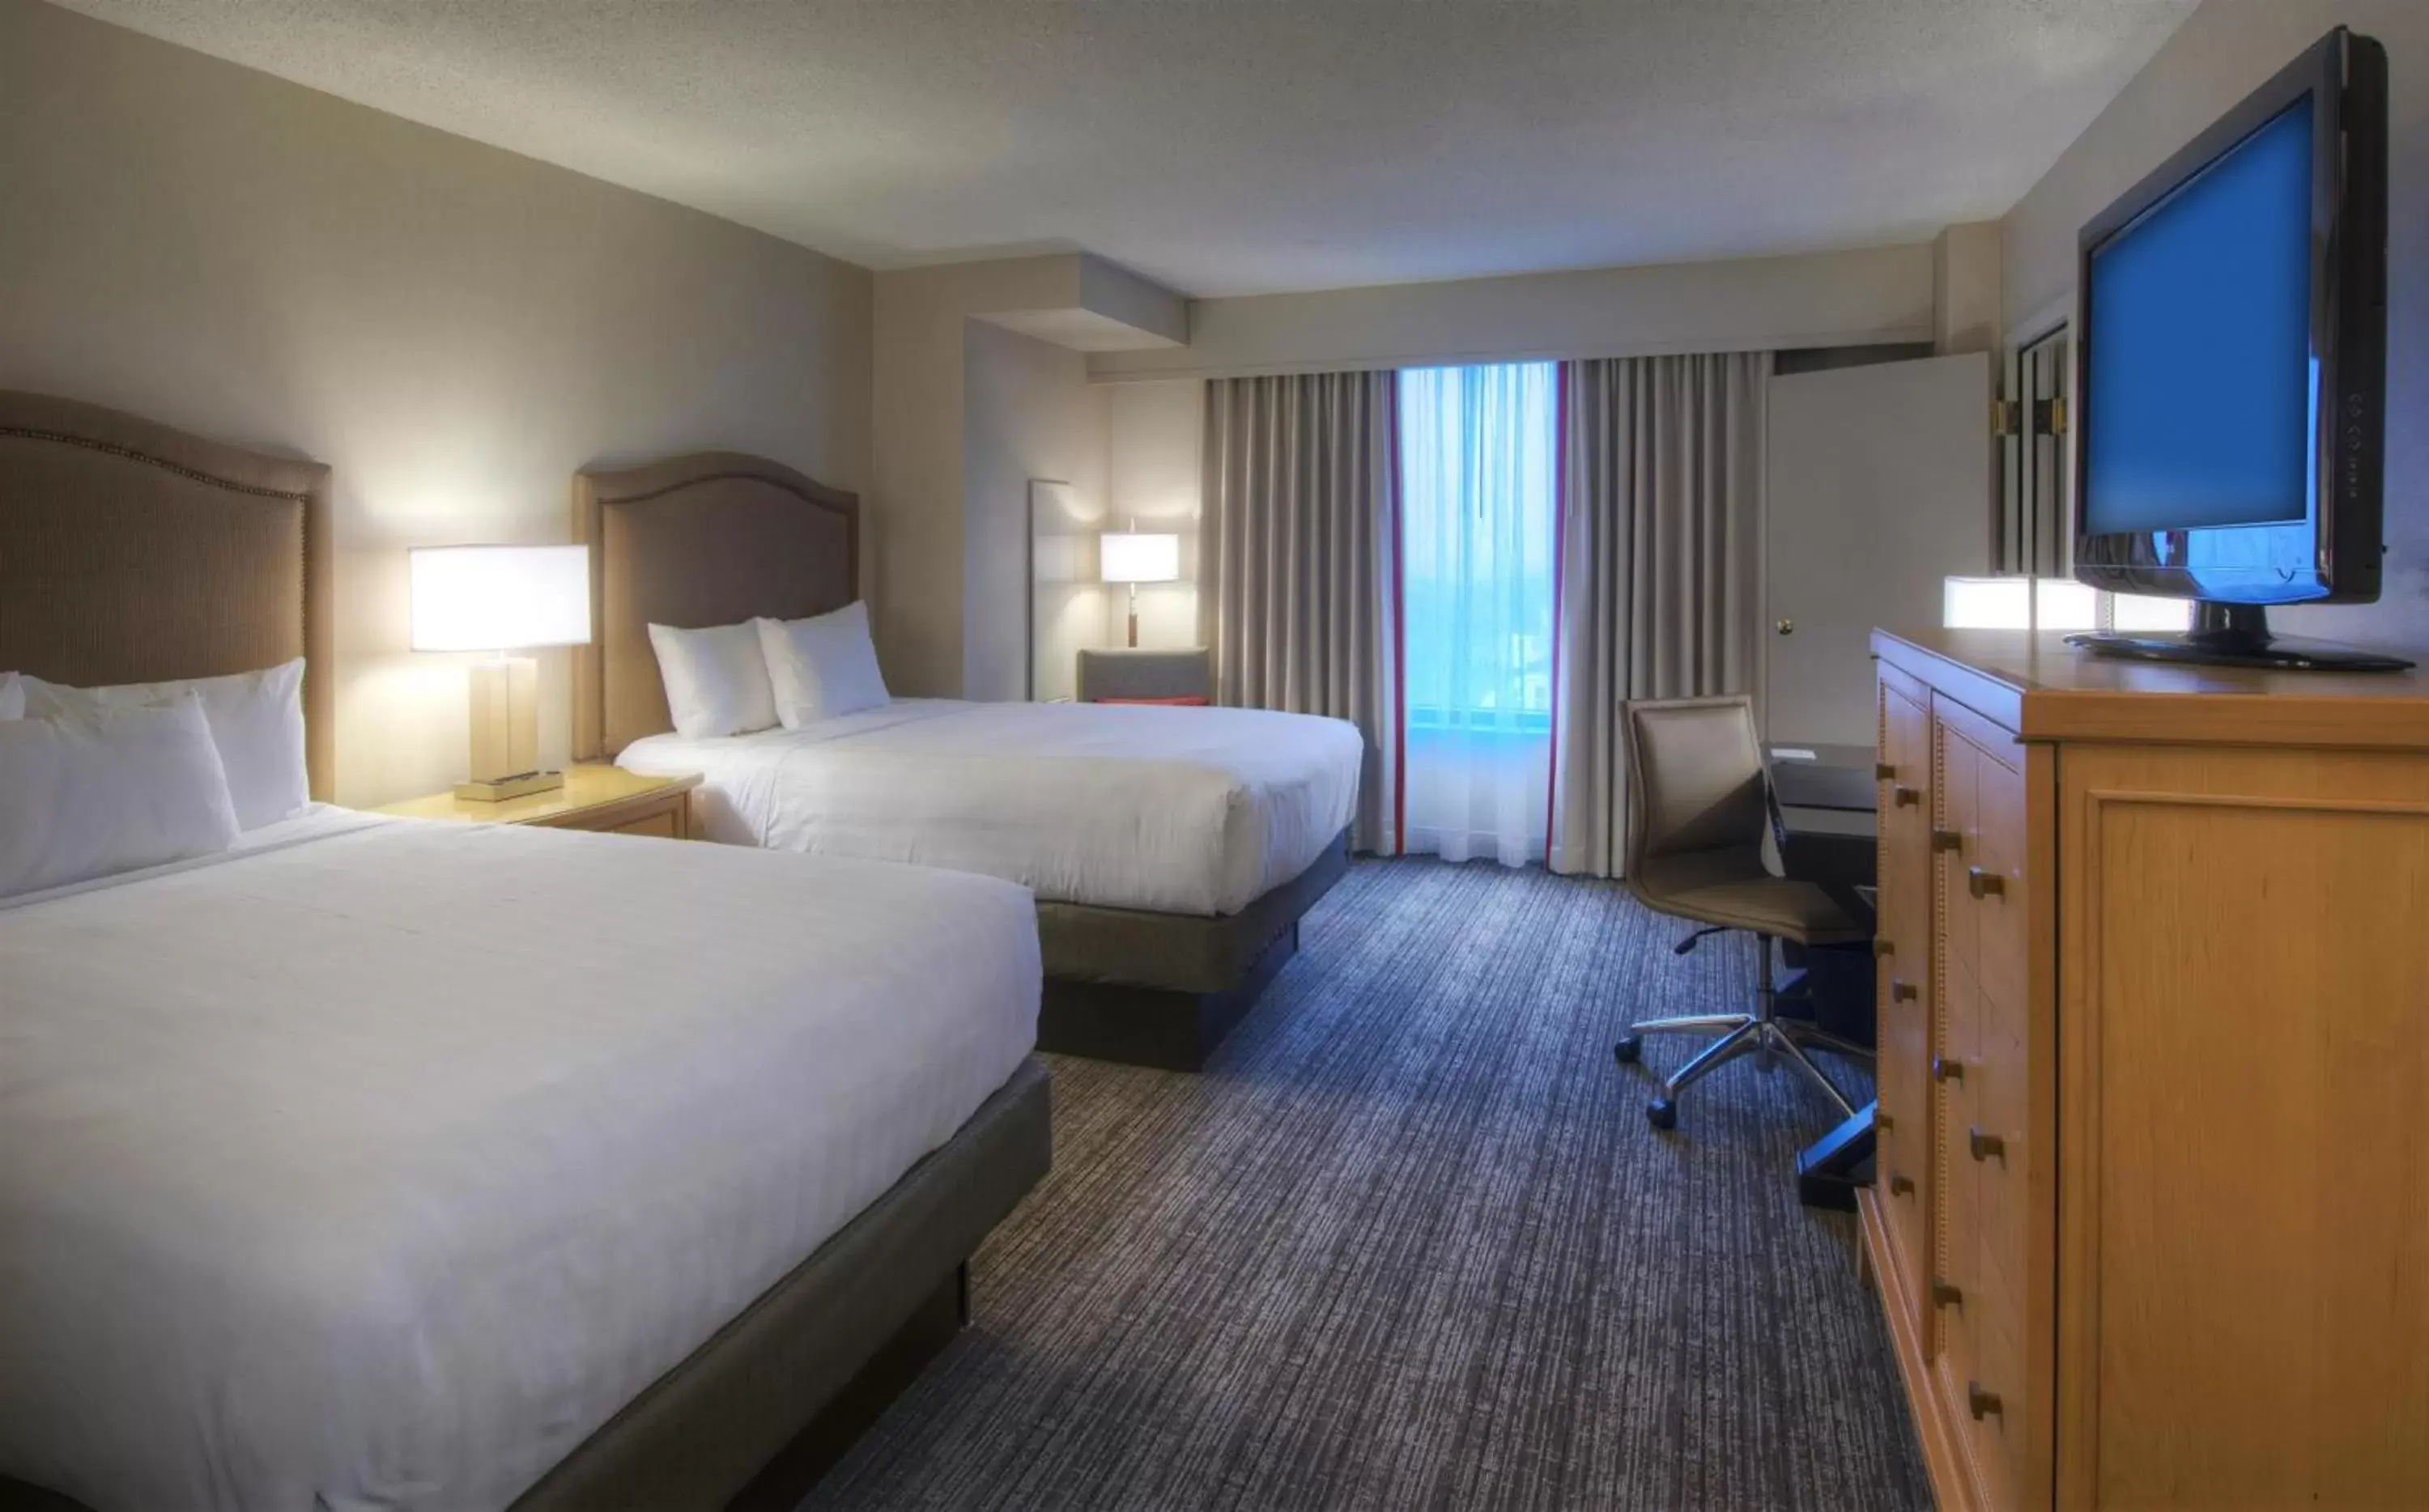 Double Room with Two Double Beds and View in Hyatt Regency Reston